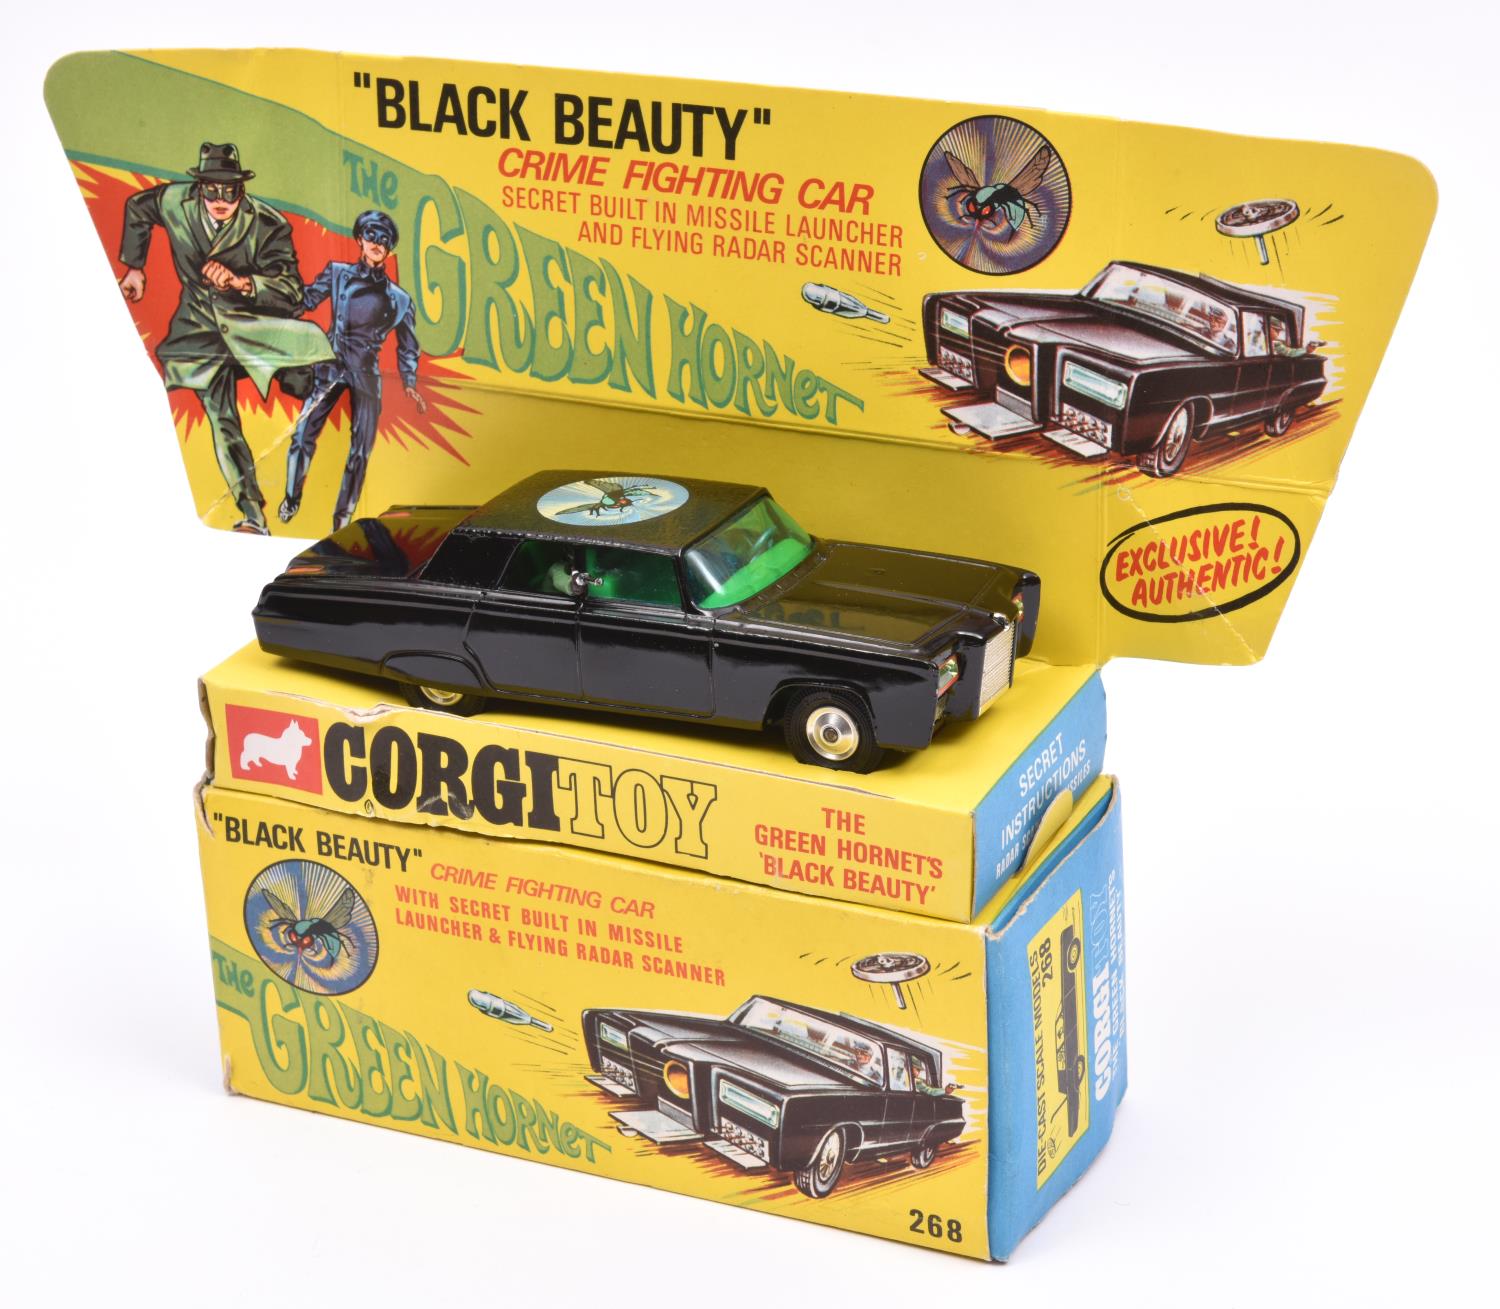 Corgi Toys The Green Hornet Black Beauty Crime Fighting Car (268). In black with motif to roof and